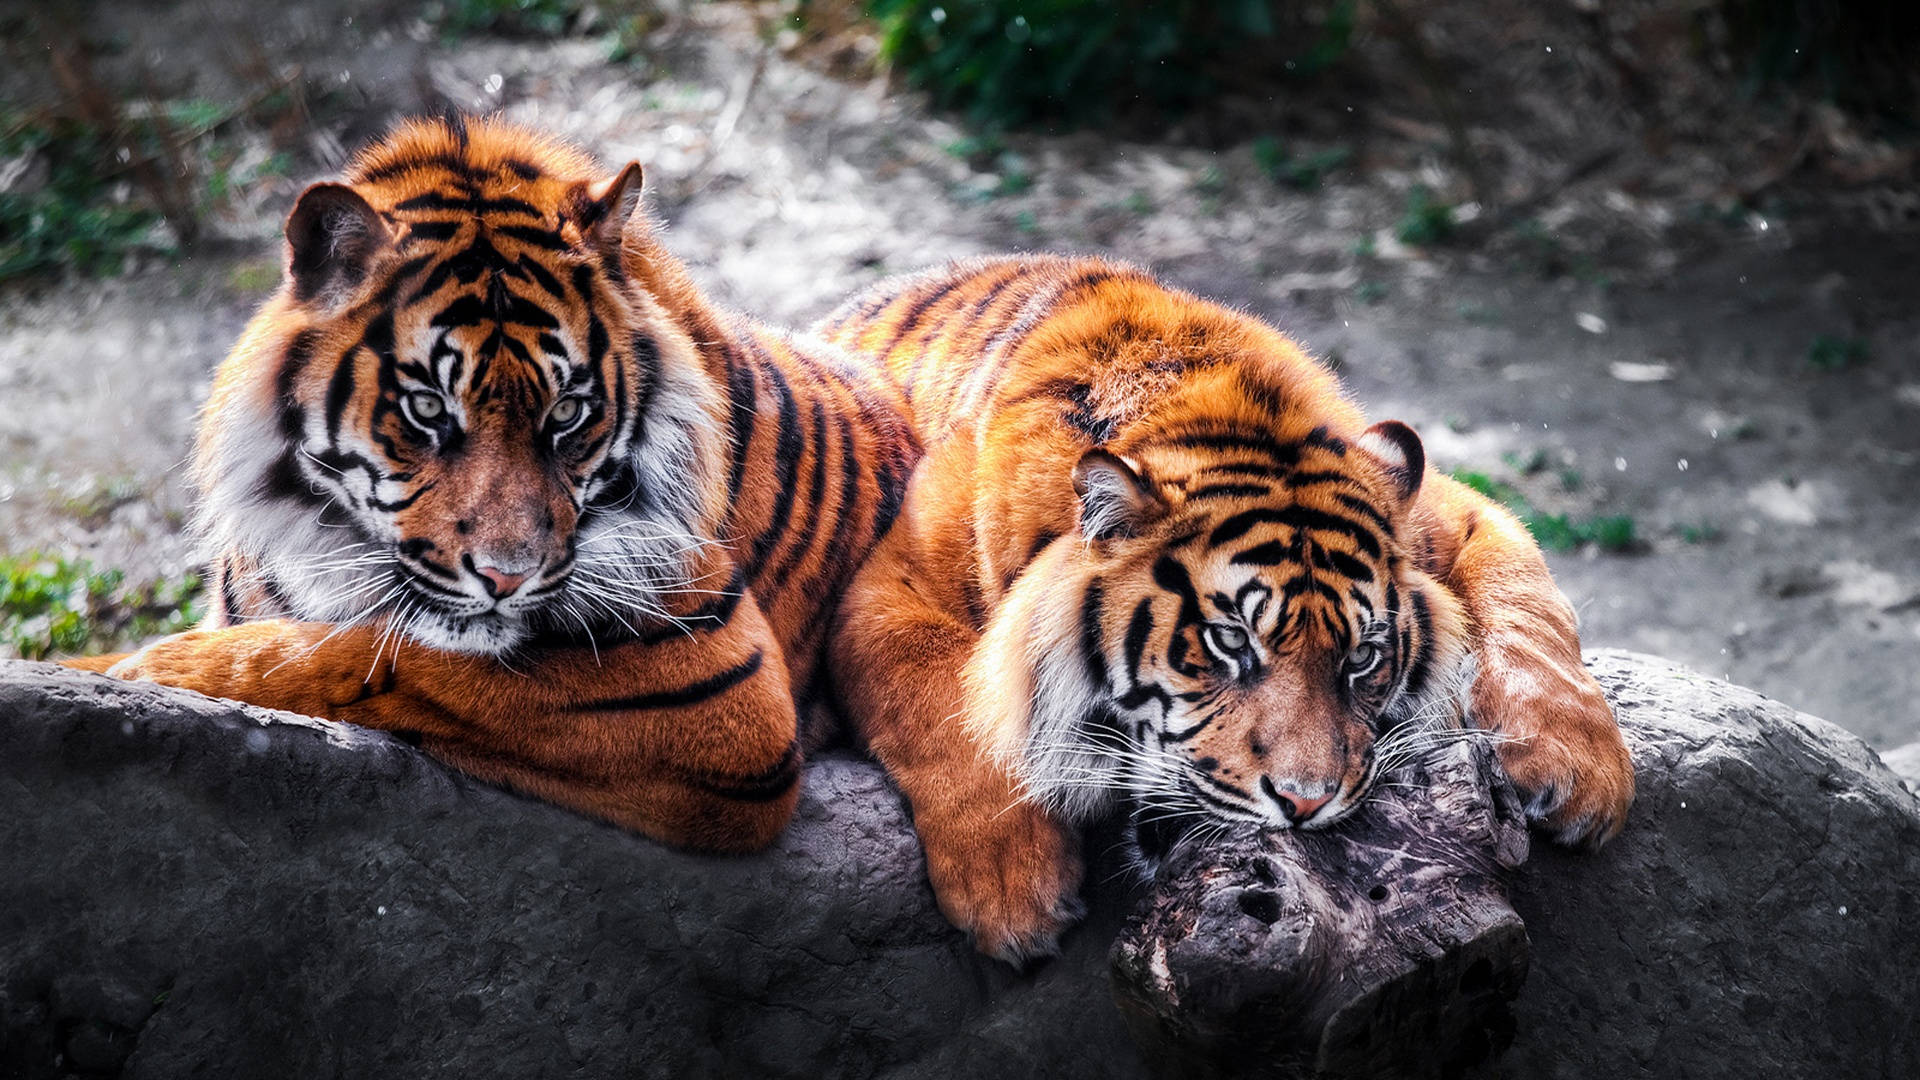 Two Tiger Animals On Damp Rock Background